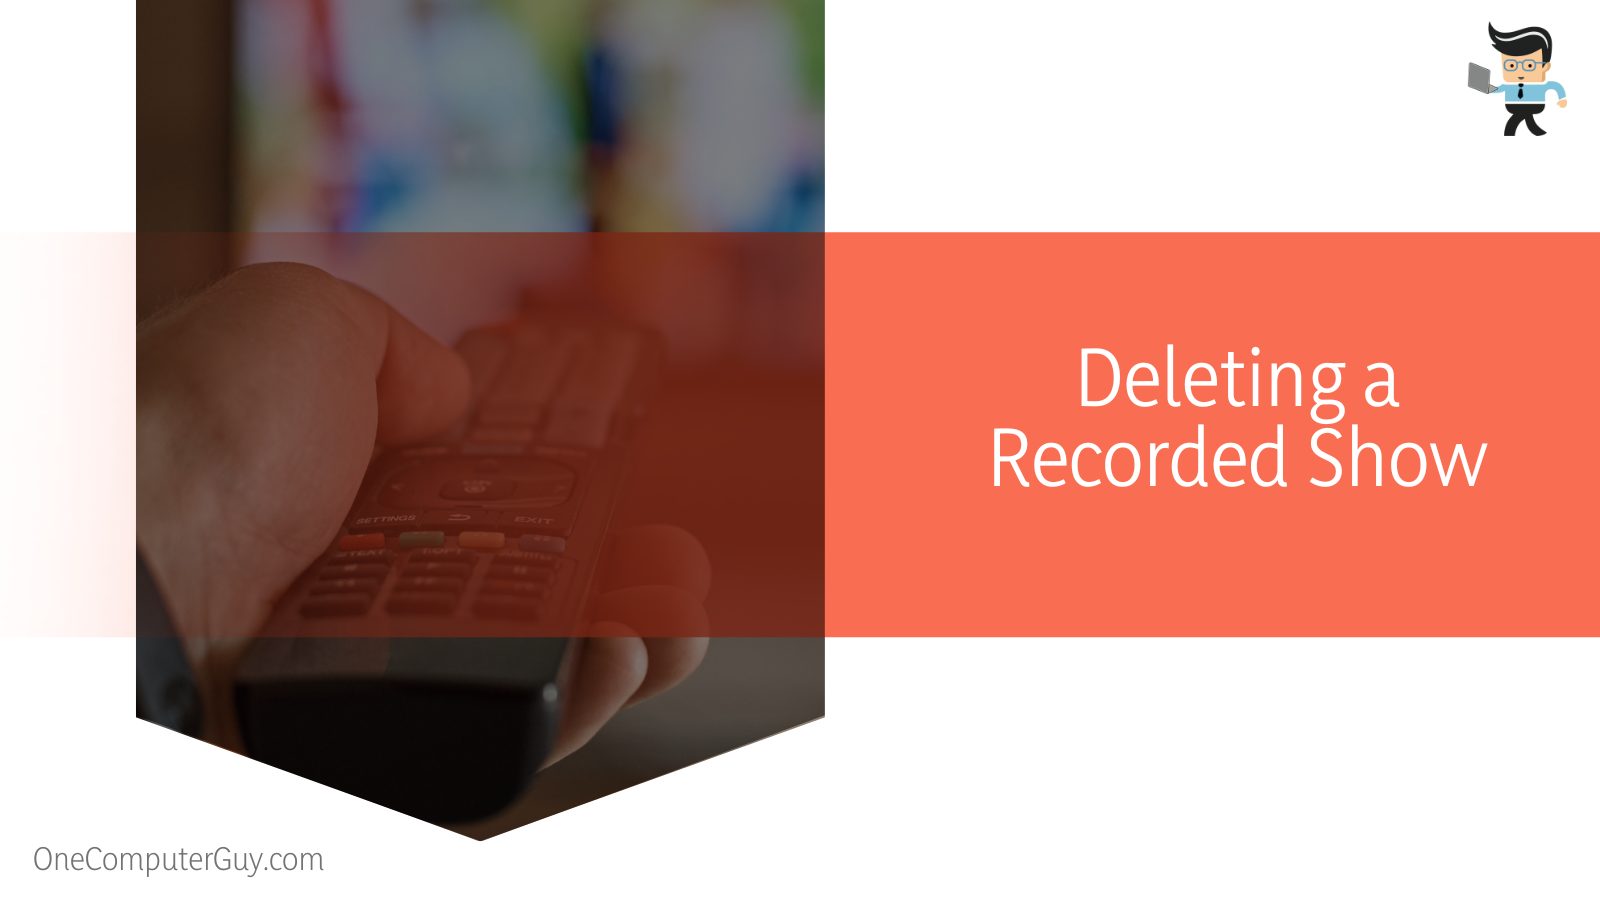 Deleting a Recorded Show